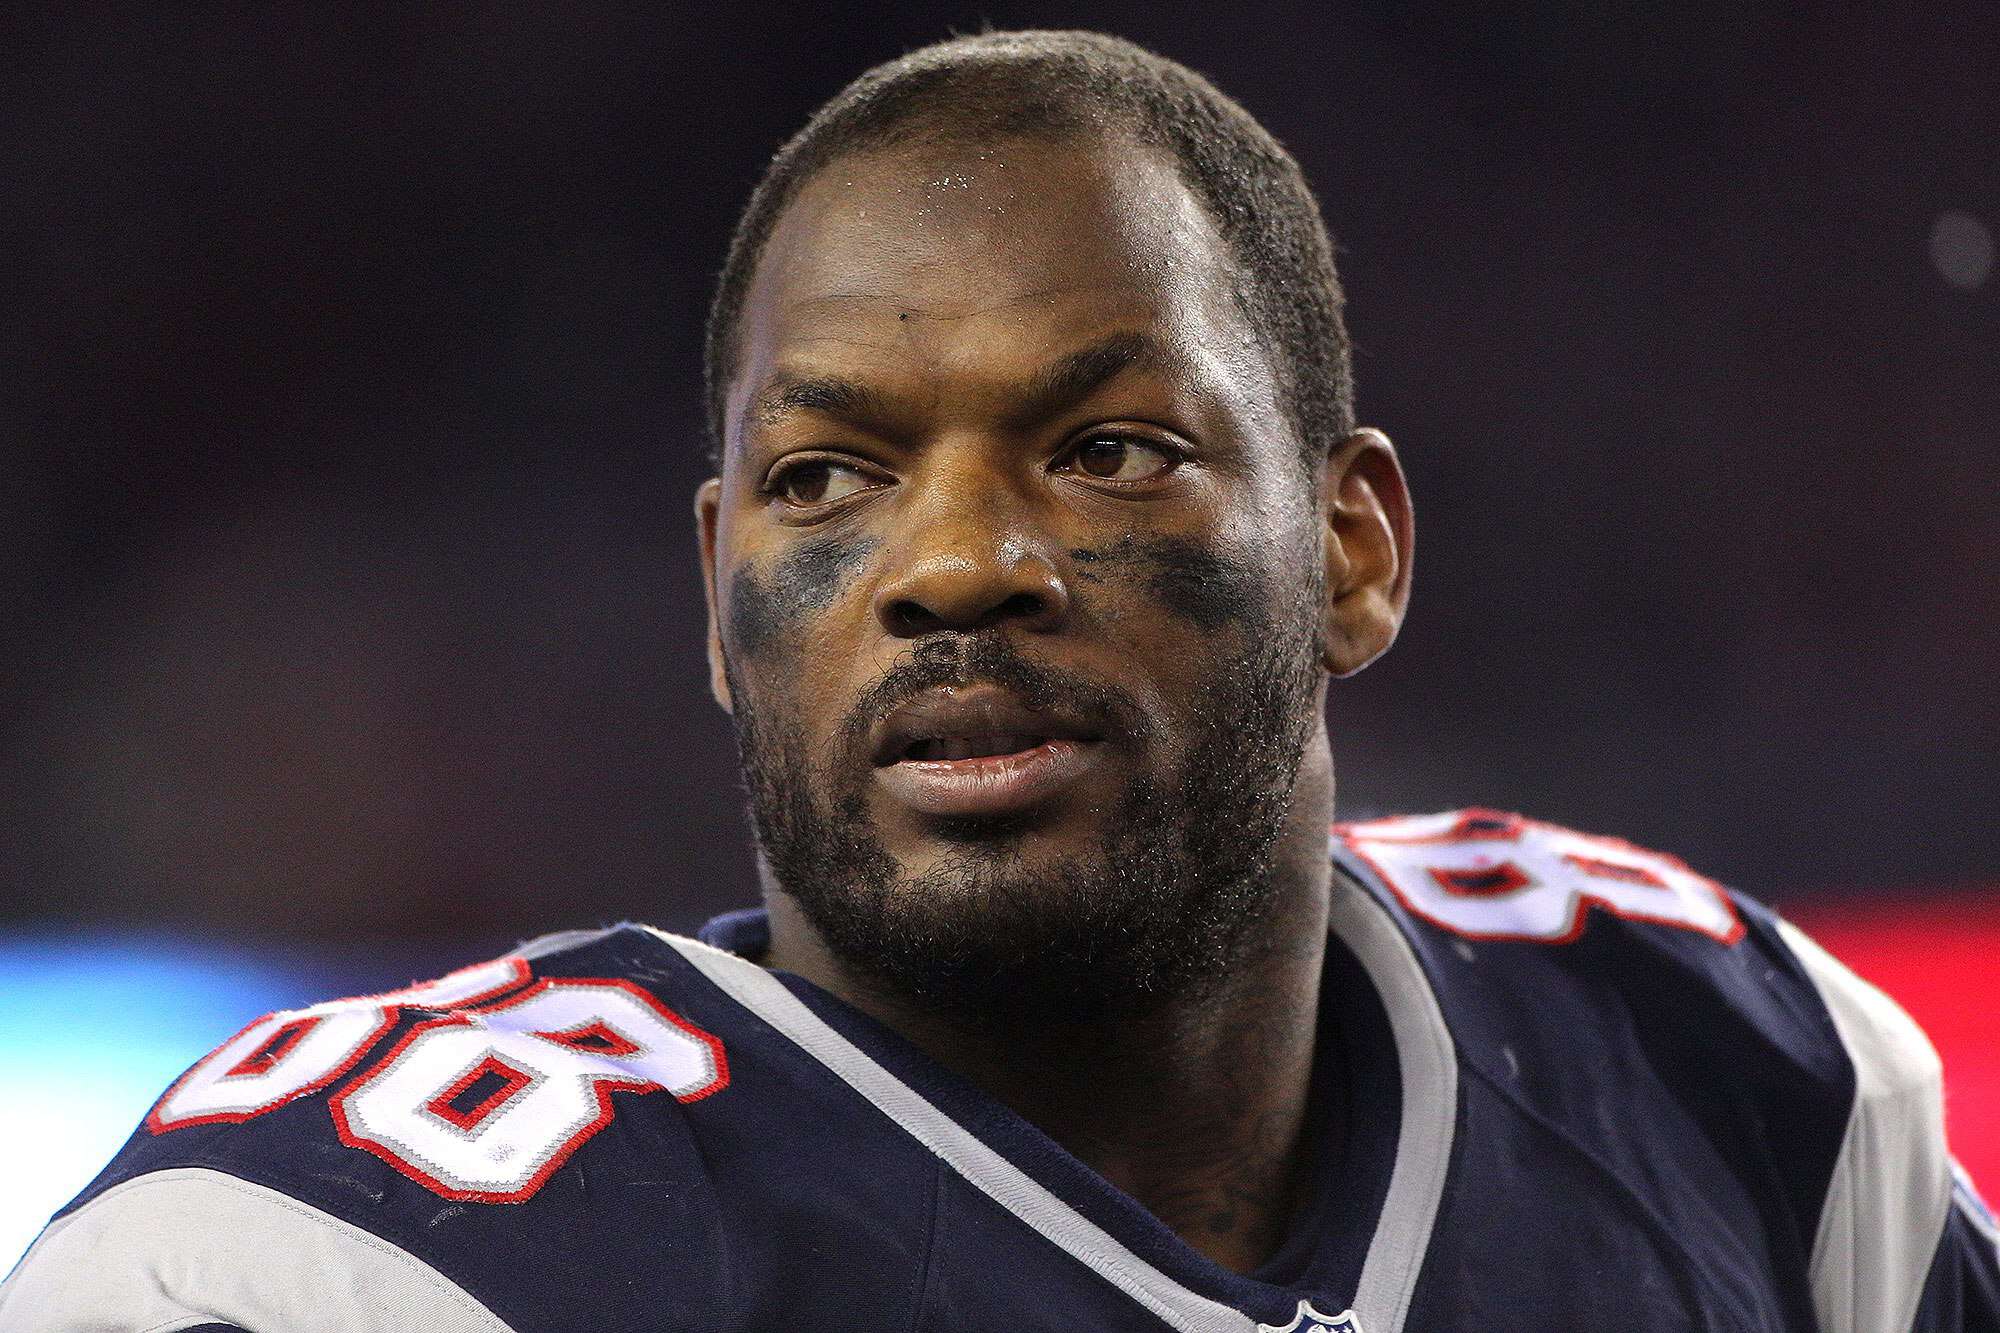 Martellus Bennett Says He Will Not Accompany His Teammates To The White House My Daily Dose